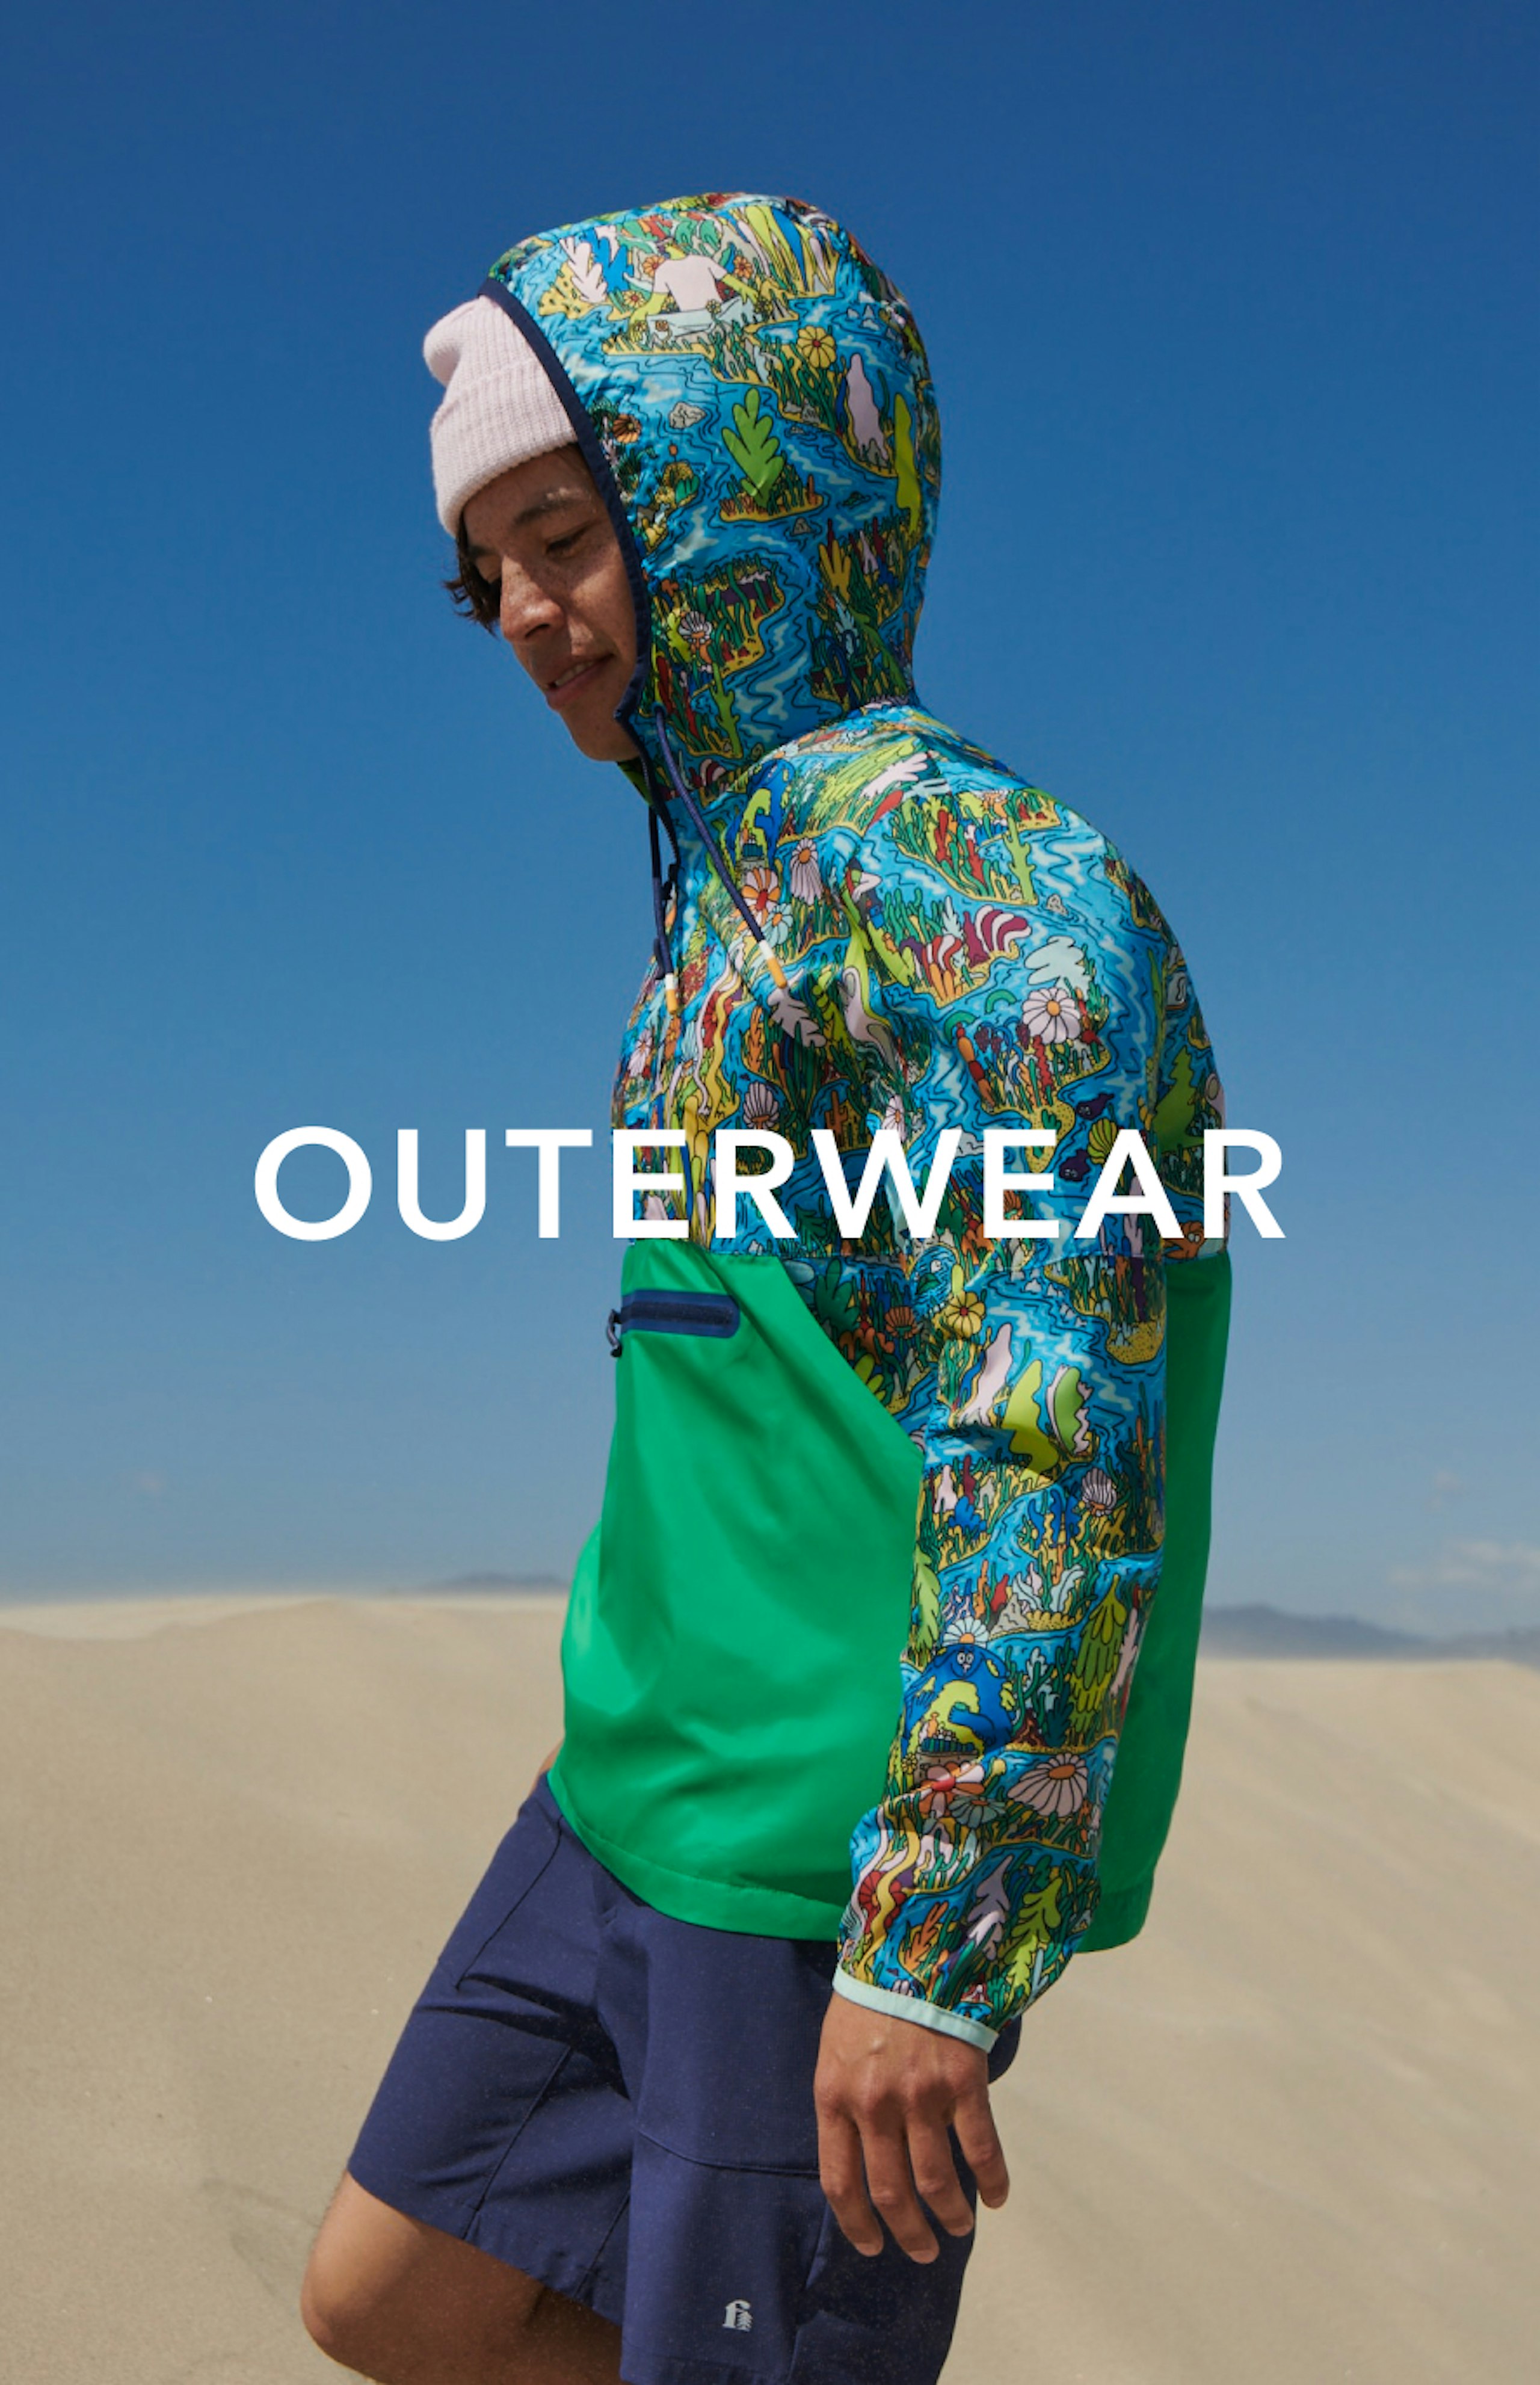 young man wearing Packable Water Resistant Mixed Media Jacket Text reads "OUTERWEAR"